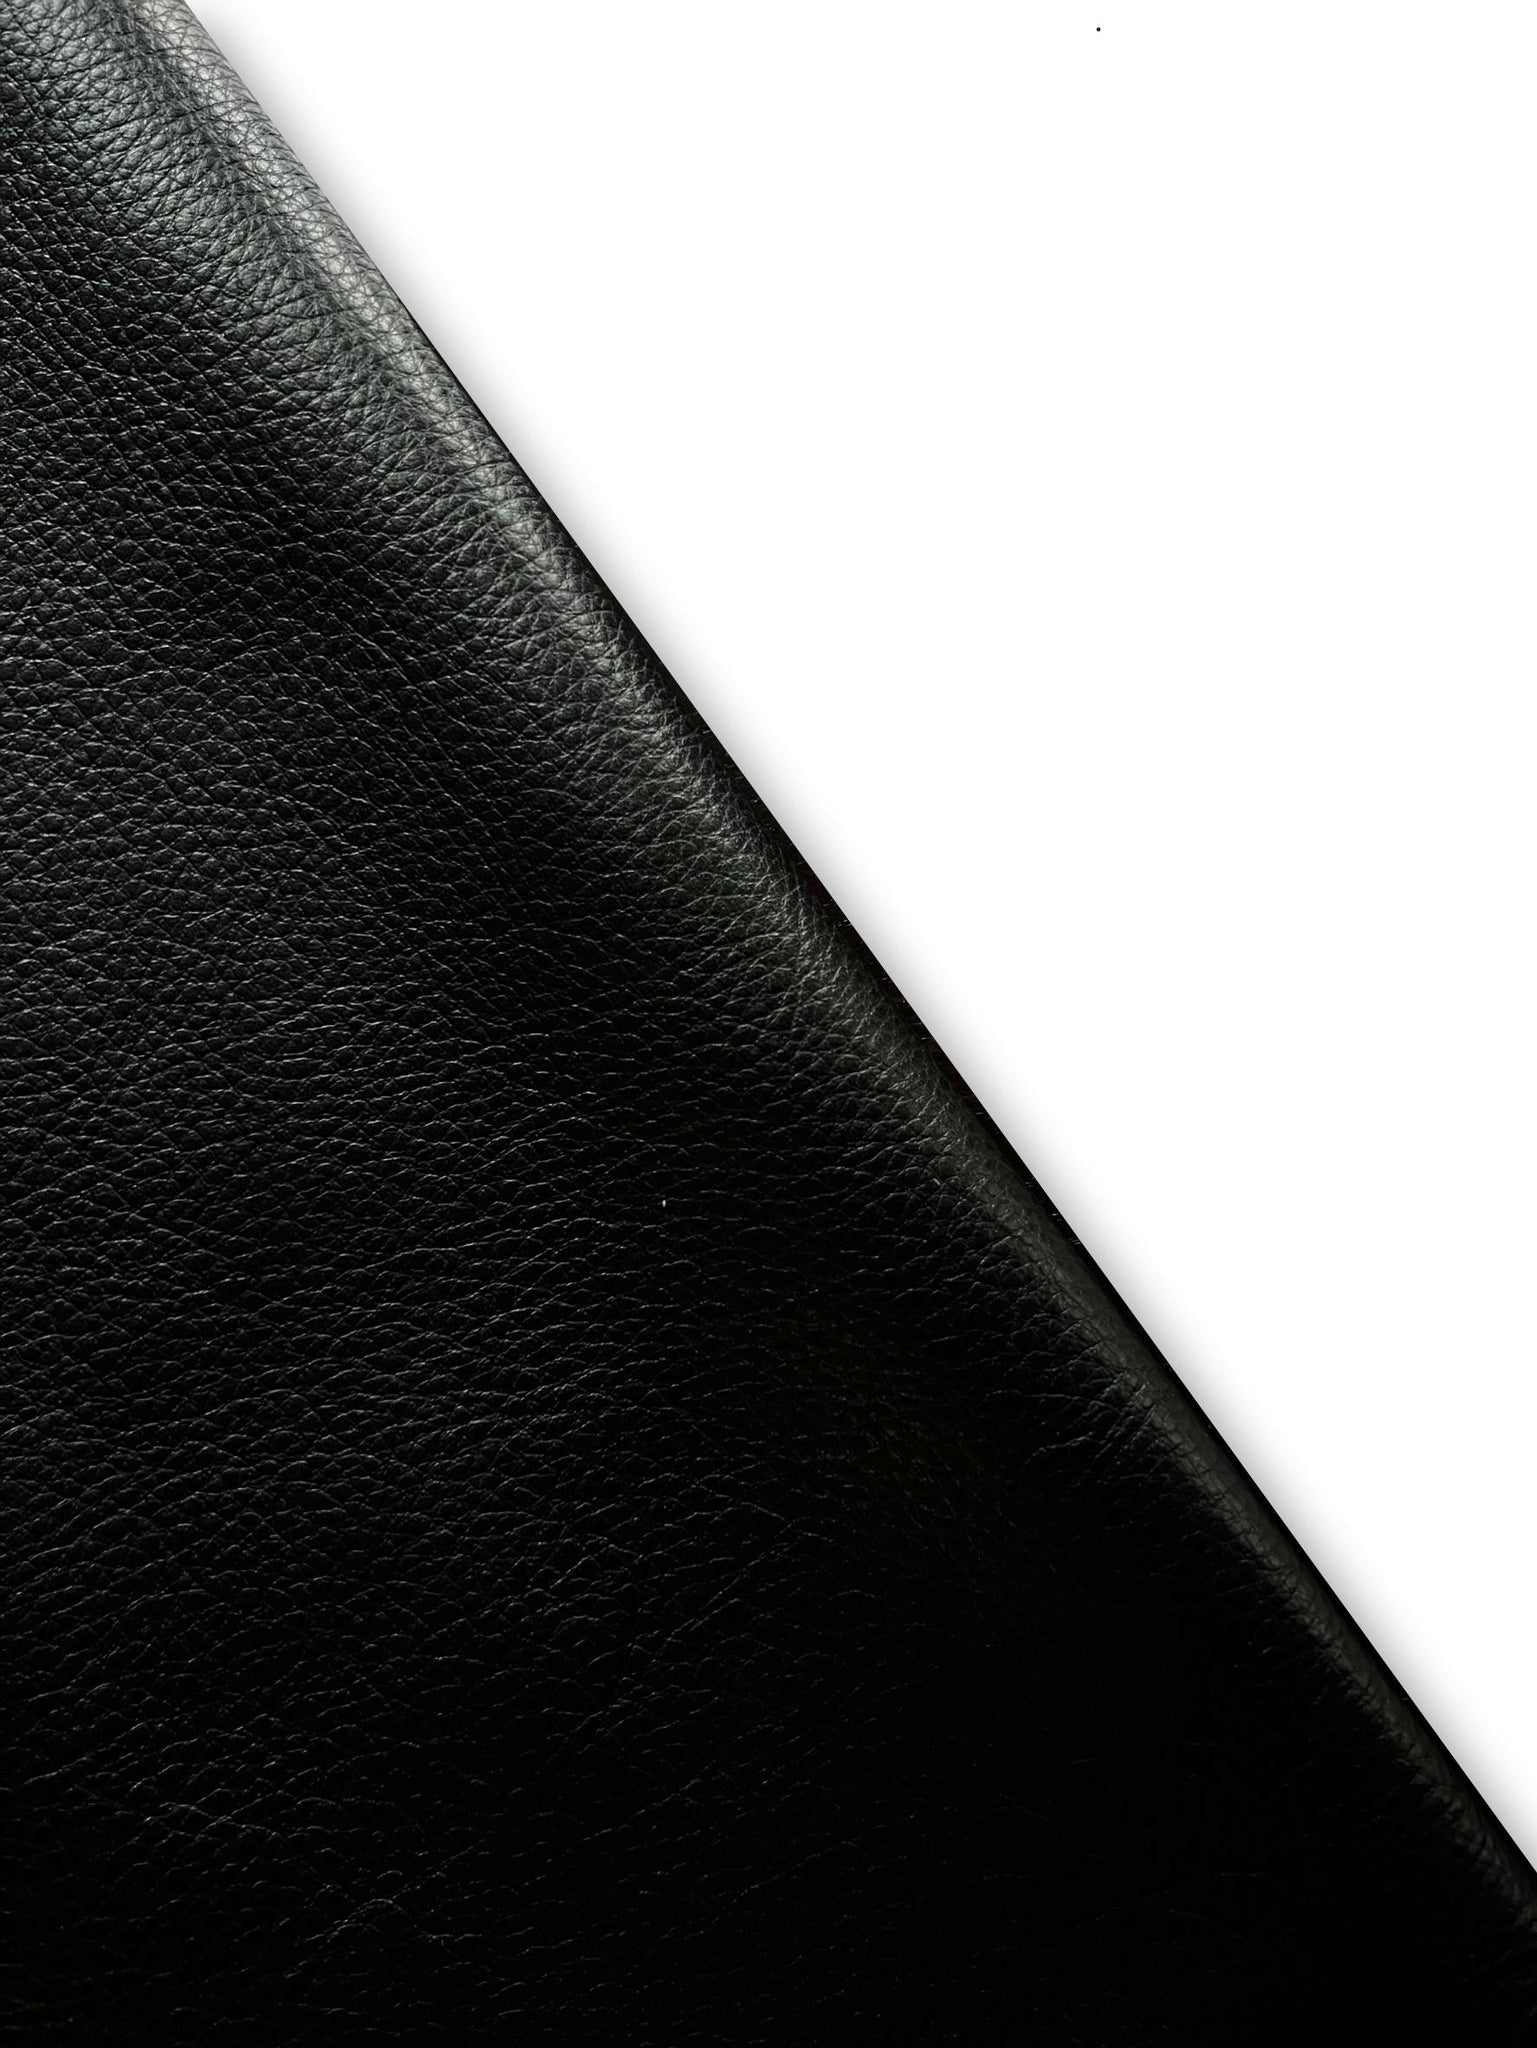 Real Genuine Black Calf Hide Leather: Thick Leather Cow Hide Black